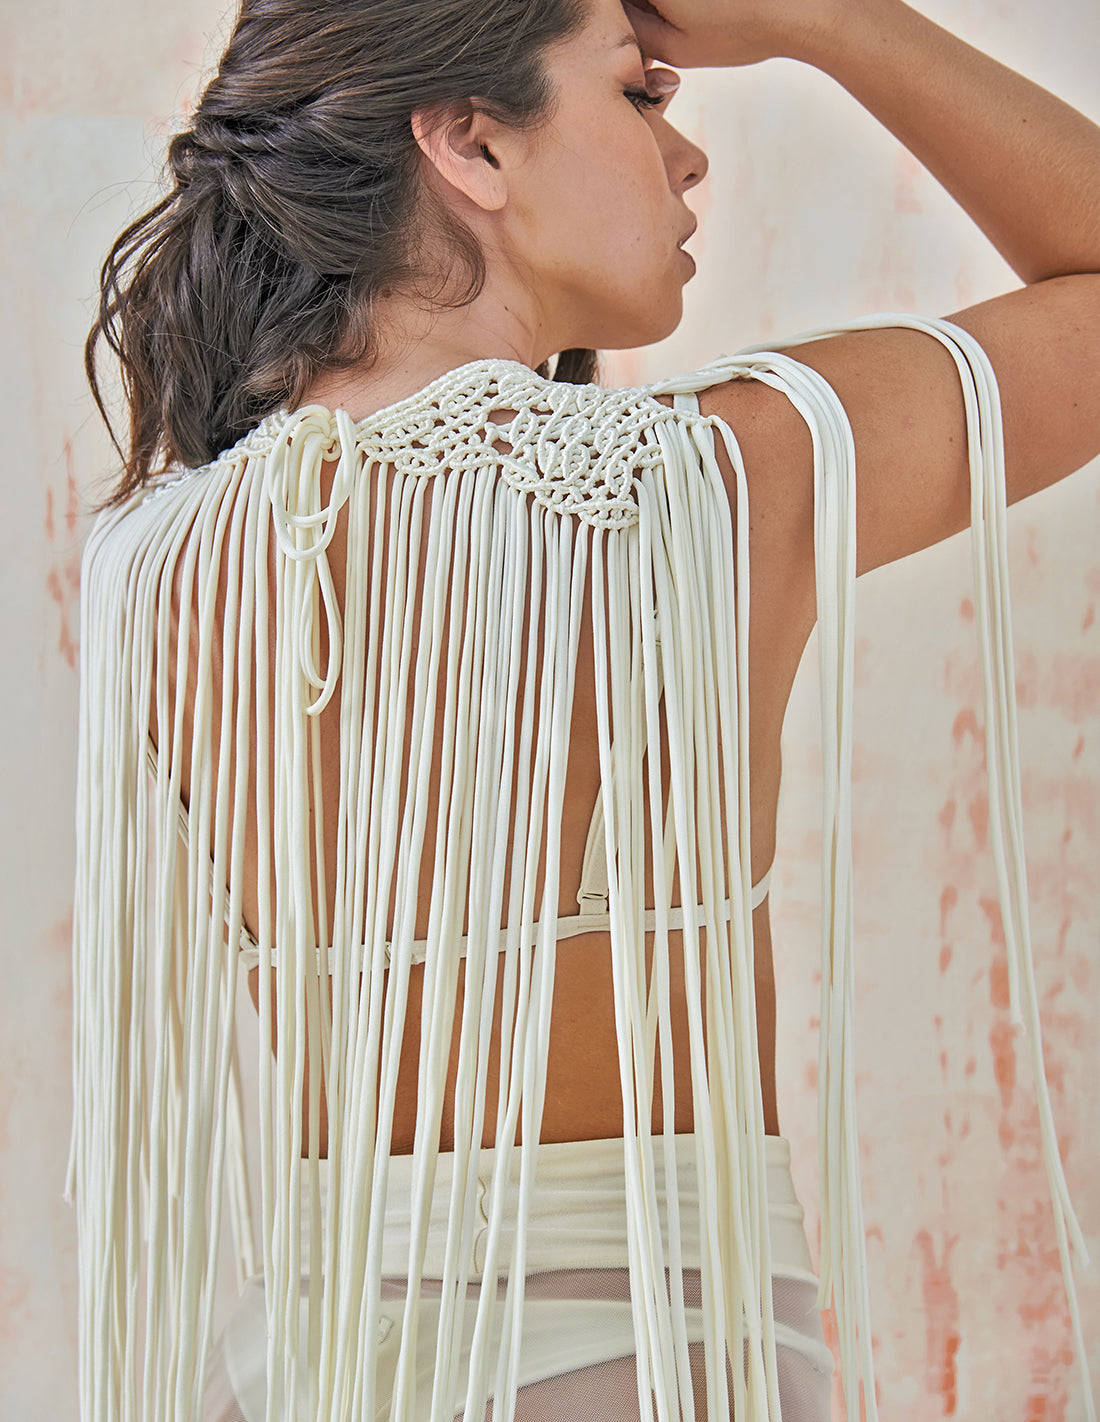 Royalty Neck Ivory. Neck With Hand Woven Macramé In Ivory. Entreaguas